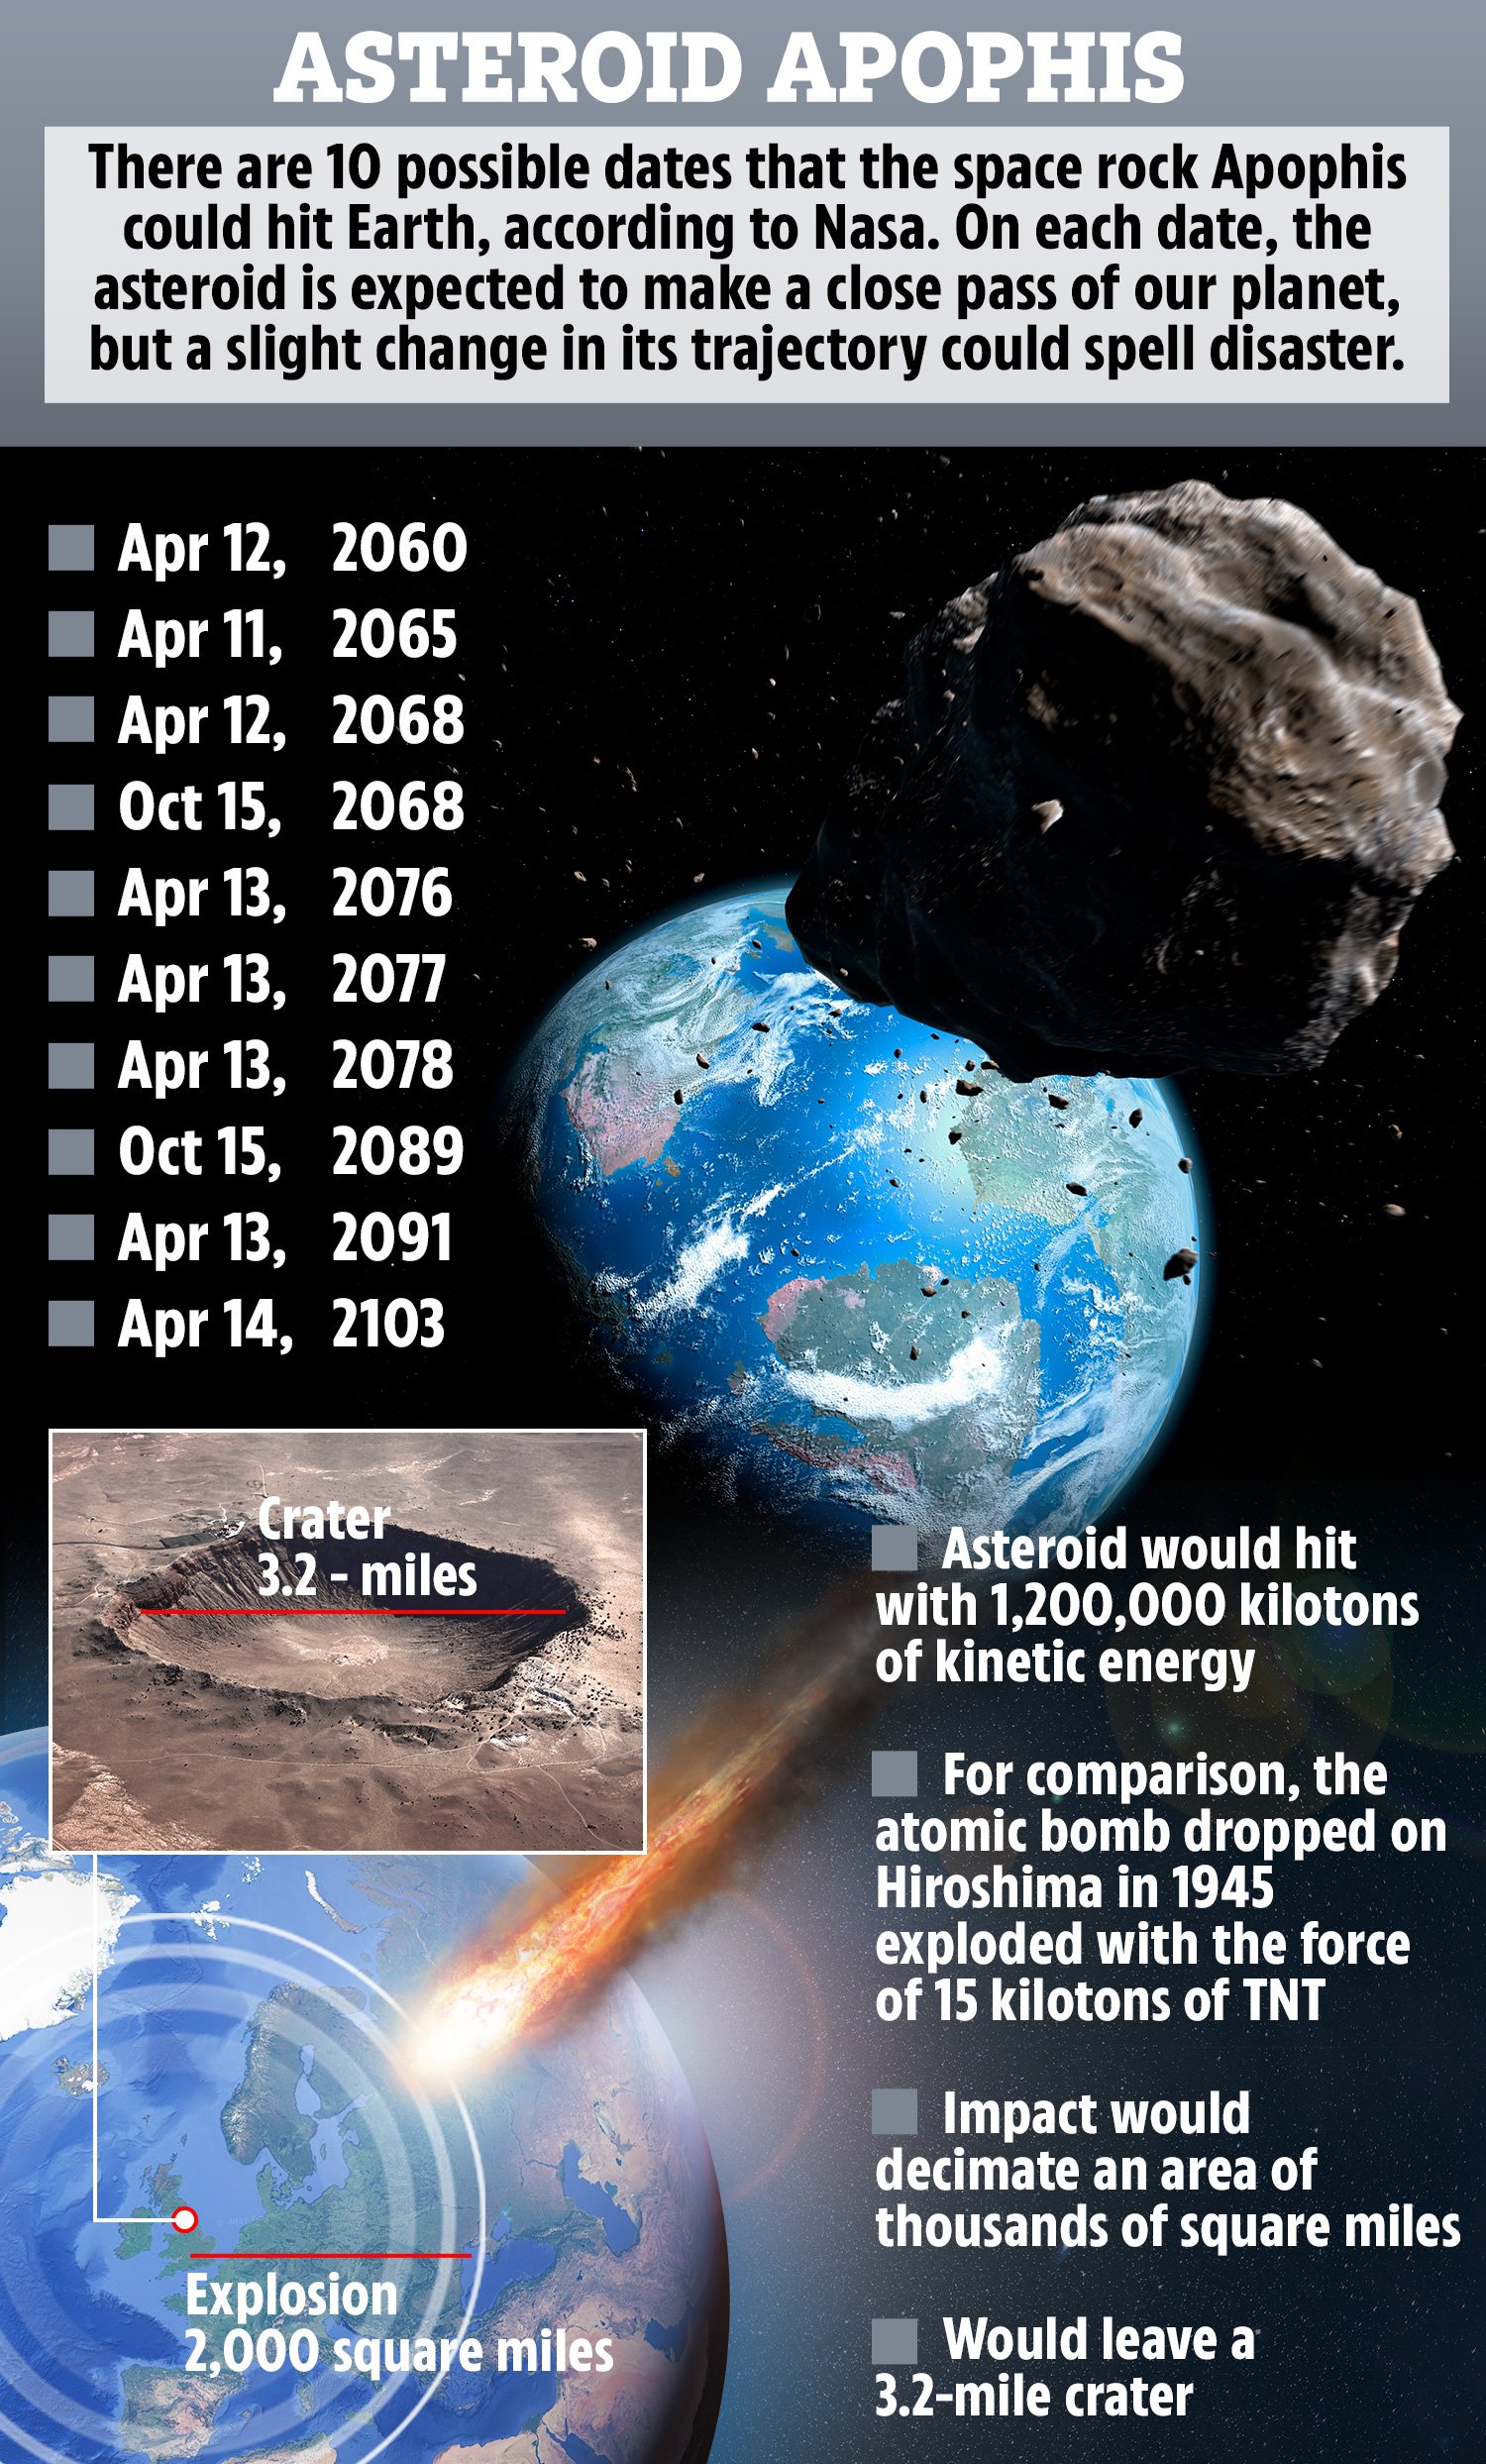 Deadly 'God of Chaos' space rock capable of killing millions could hit Earth on 10 different dates | The Irish Sun